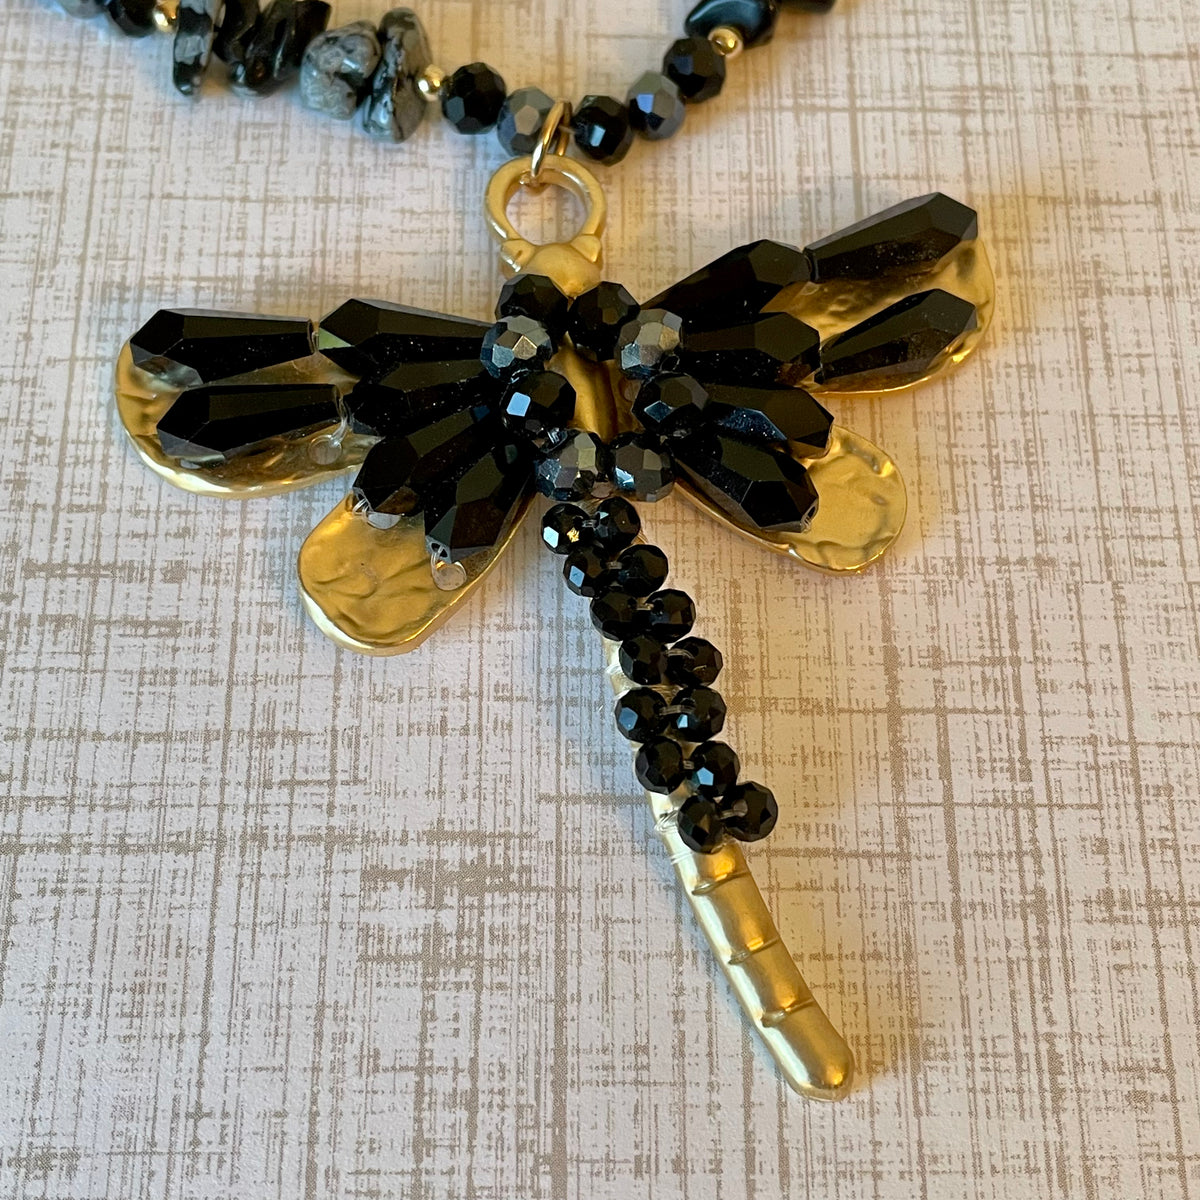 Long Beaded Dragonfly Necklace